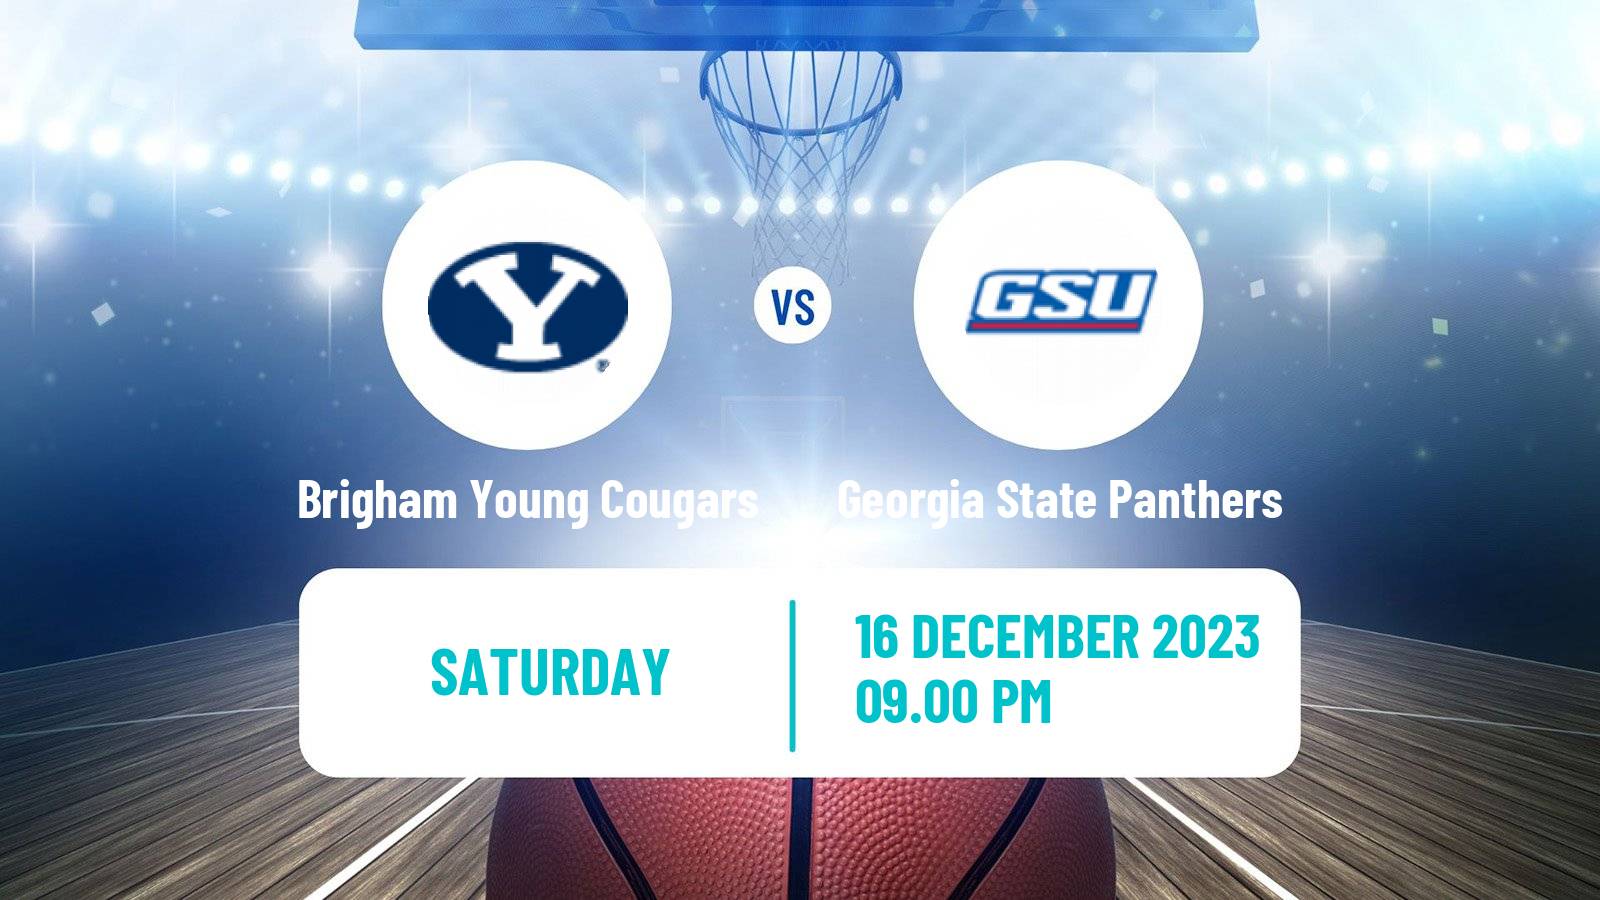 Basketball NCAA College Basketball Brigham Young Cougars - Georgia State Panthers